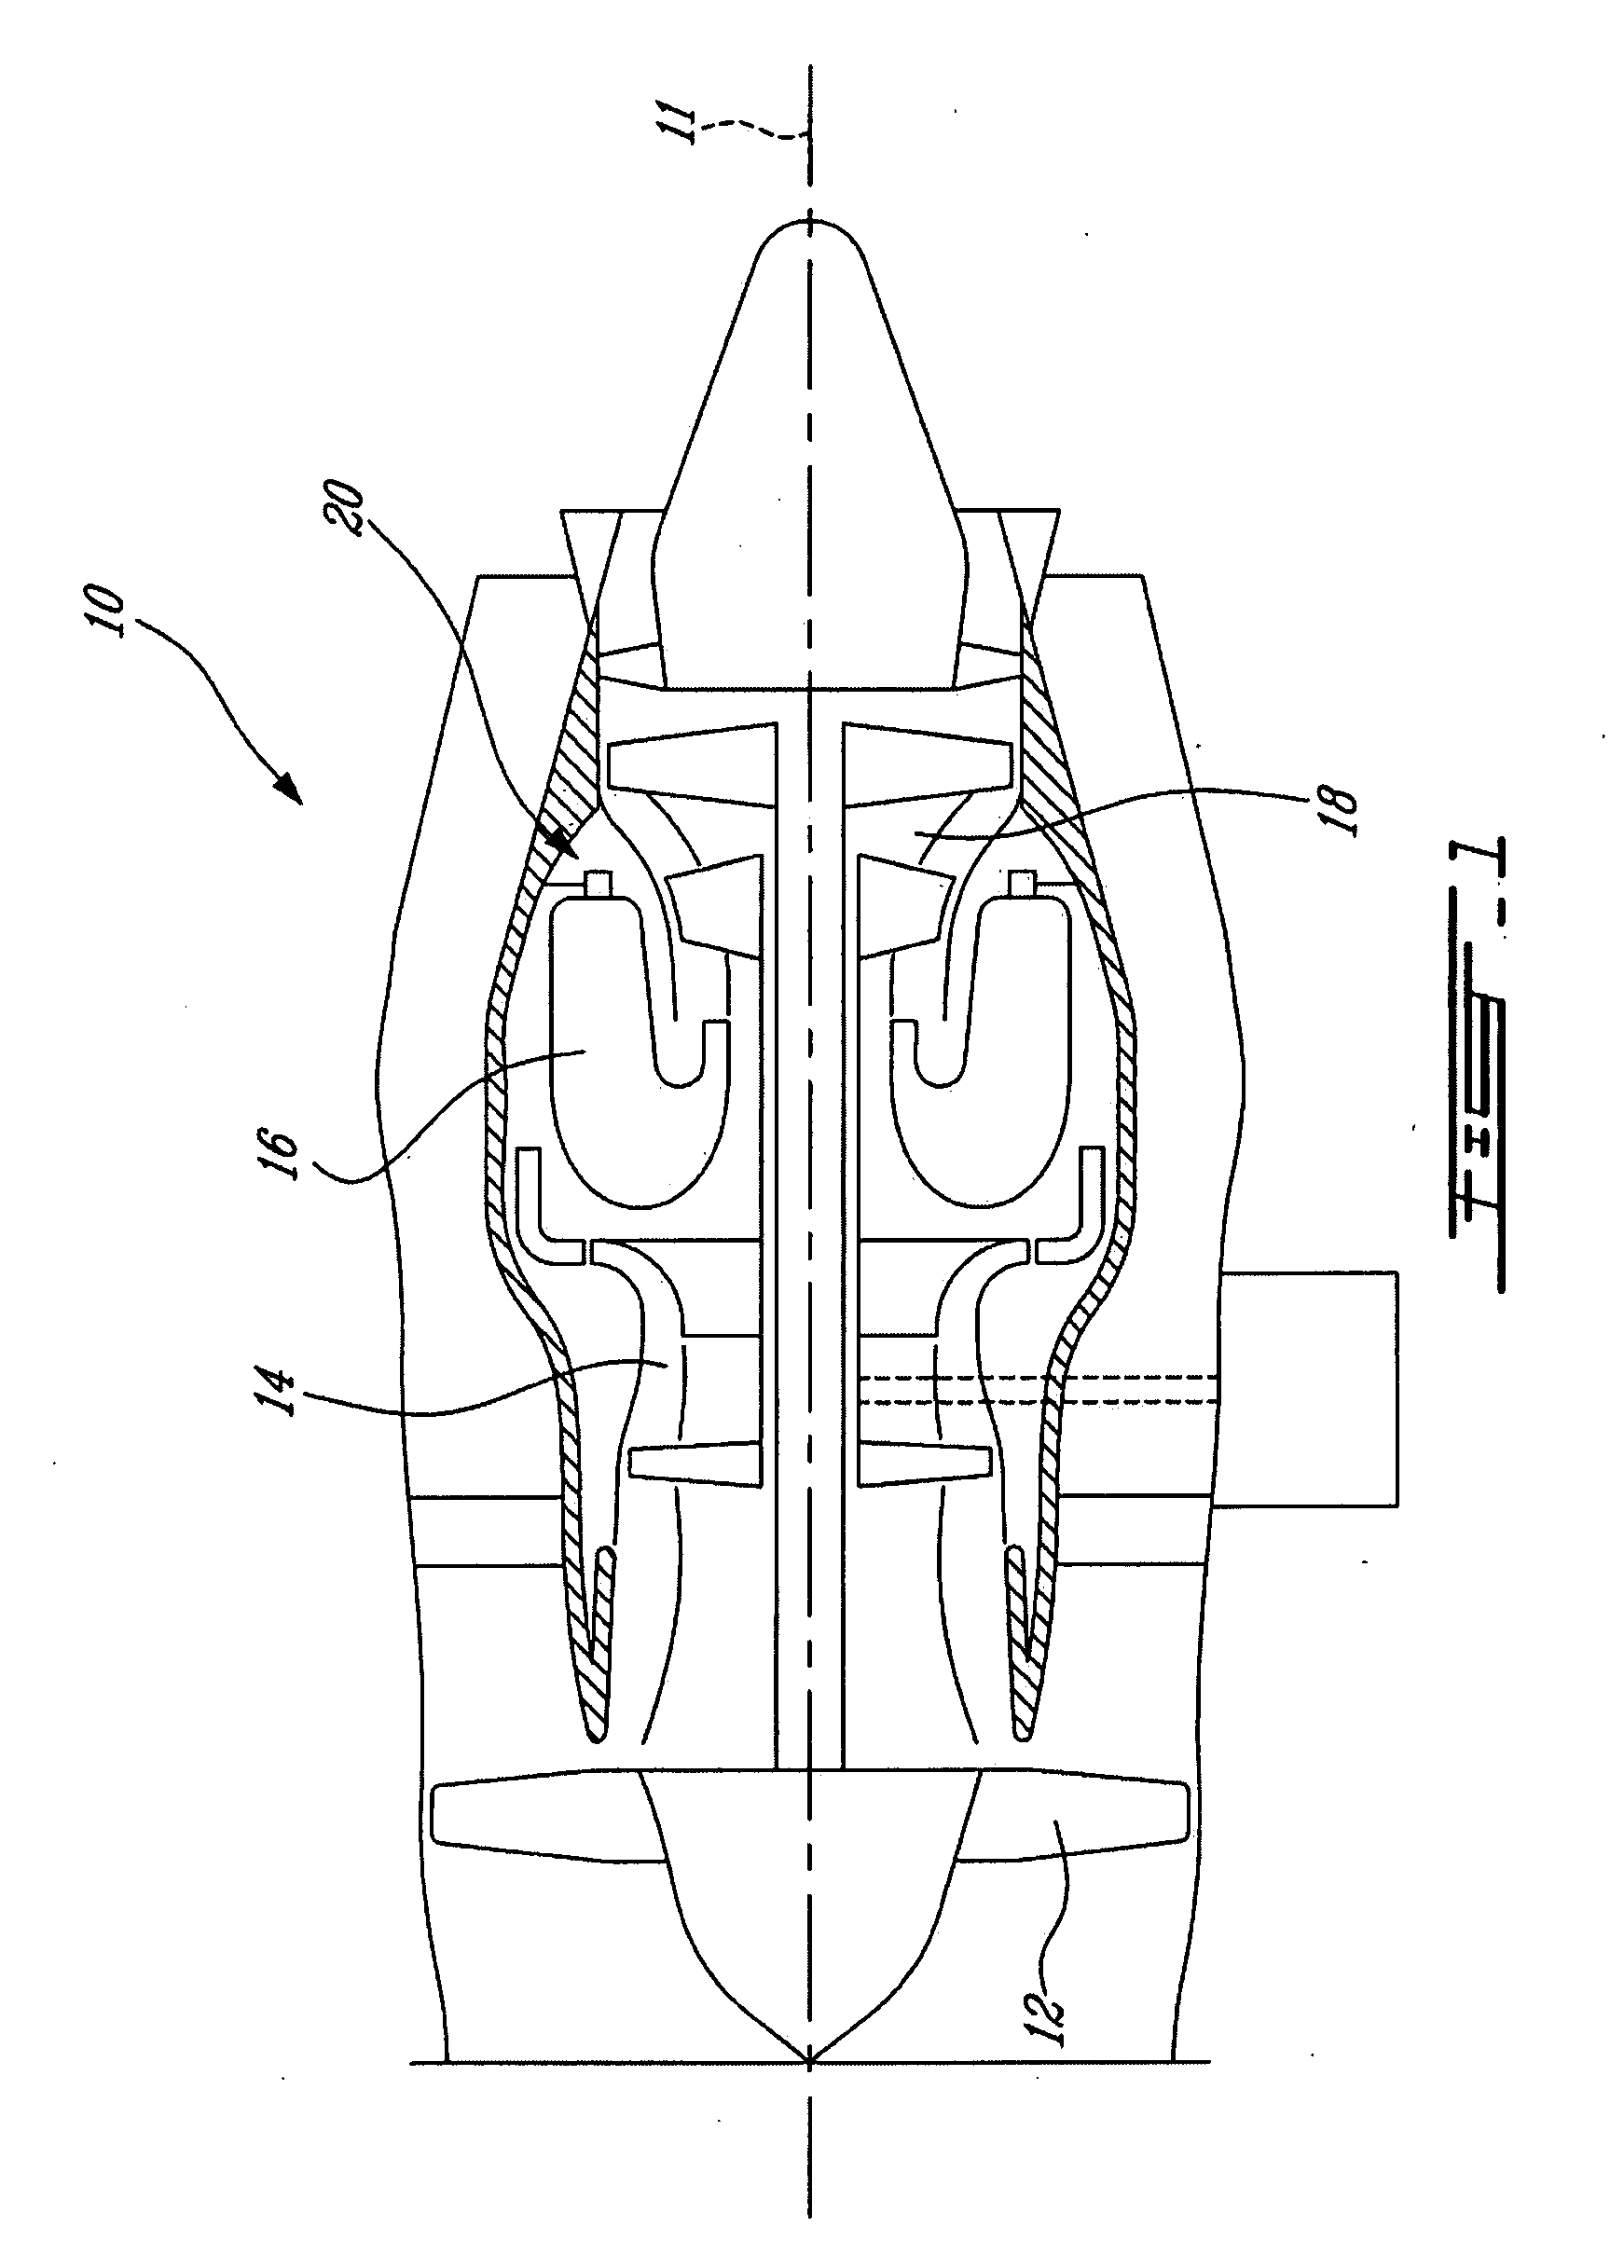 Fuel injection system for a gas turbine engine